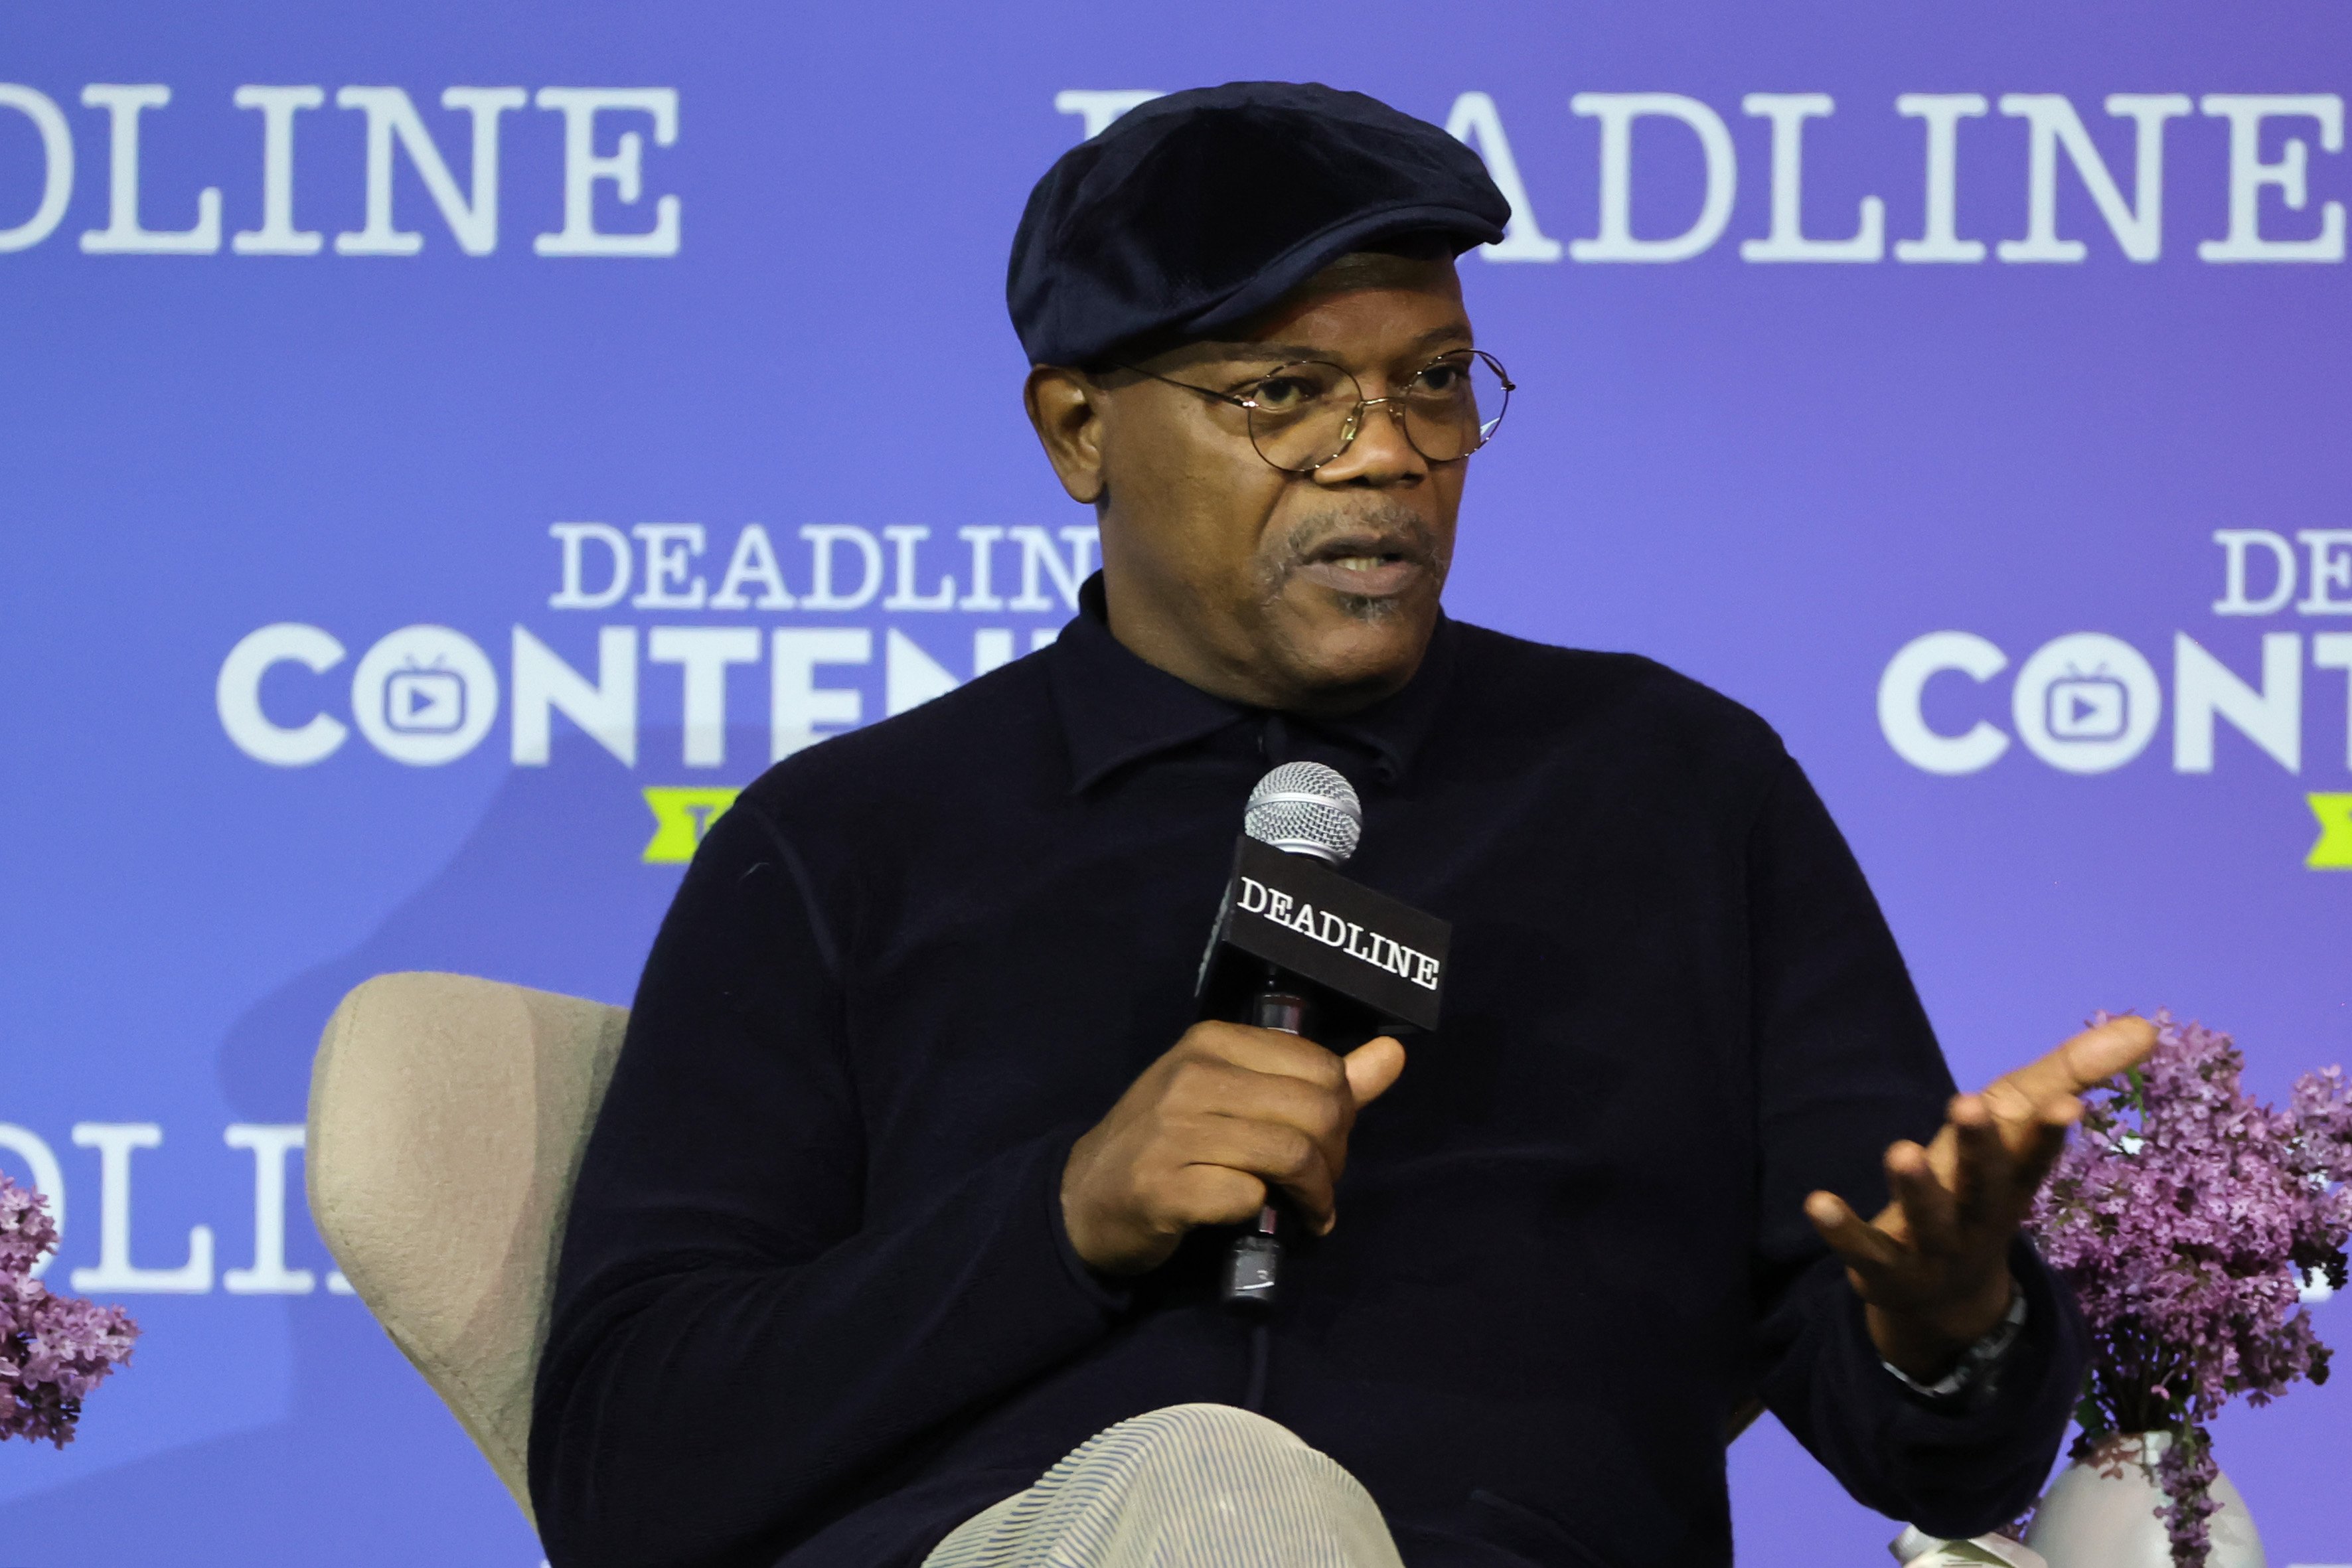 Movie star Samuel L. Jackson speaks about The Last Days of Ptolemy Grey at a panel for the Deadline Contenders Television.